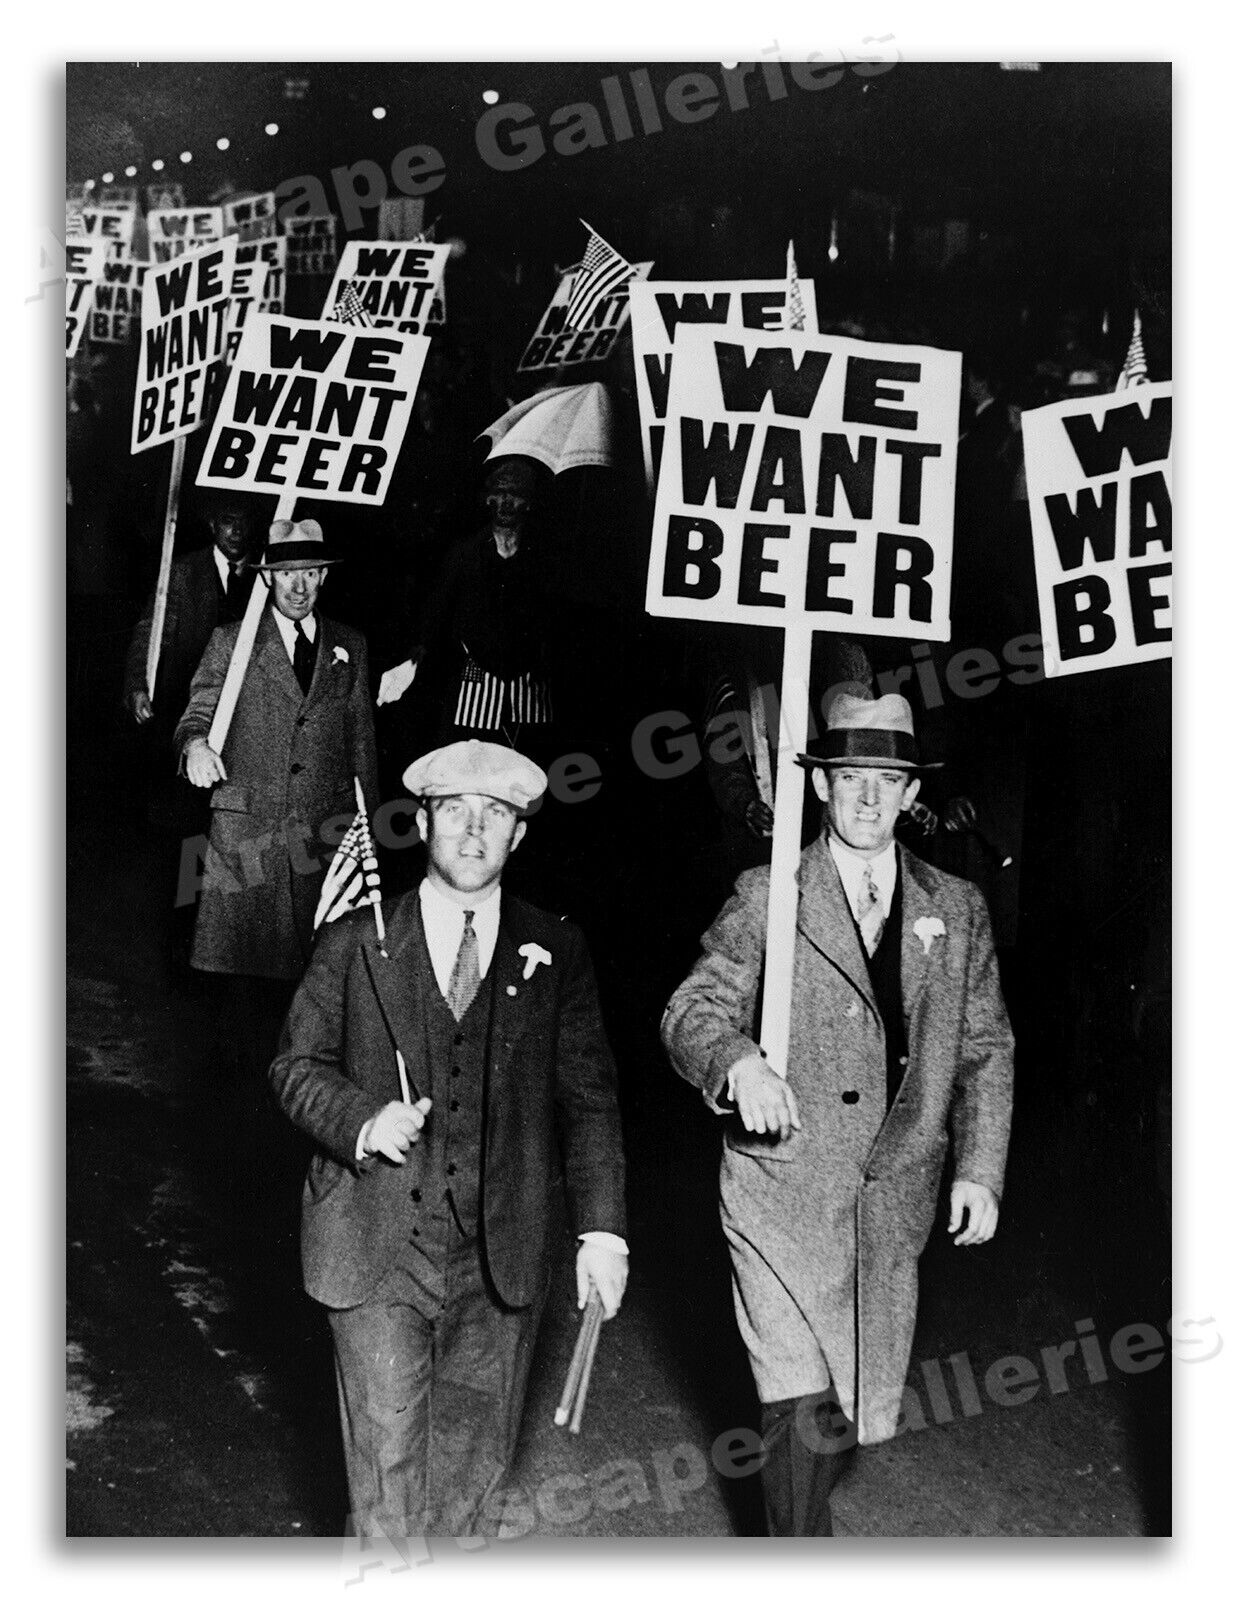 We Want Beer - 1931 Prohibition Protest Photo Print - 18x24